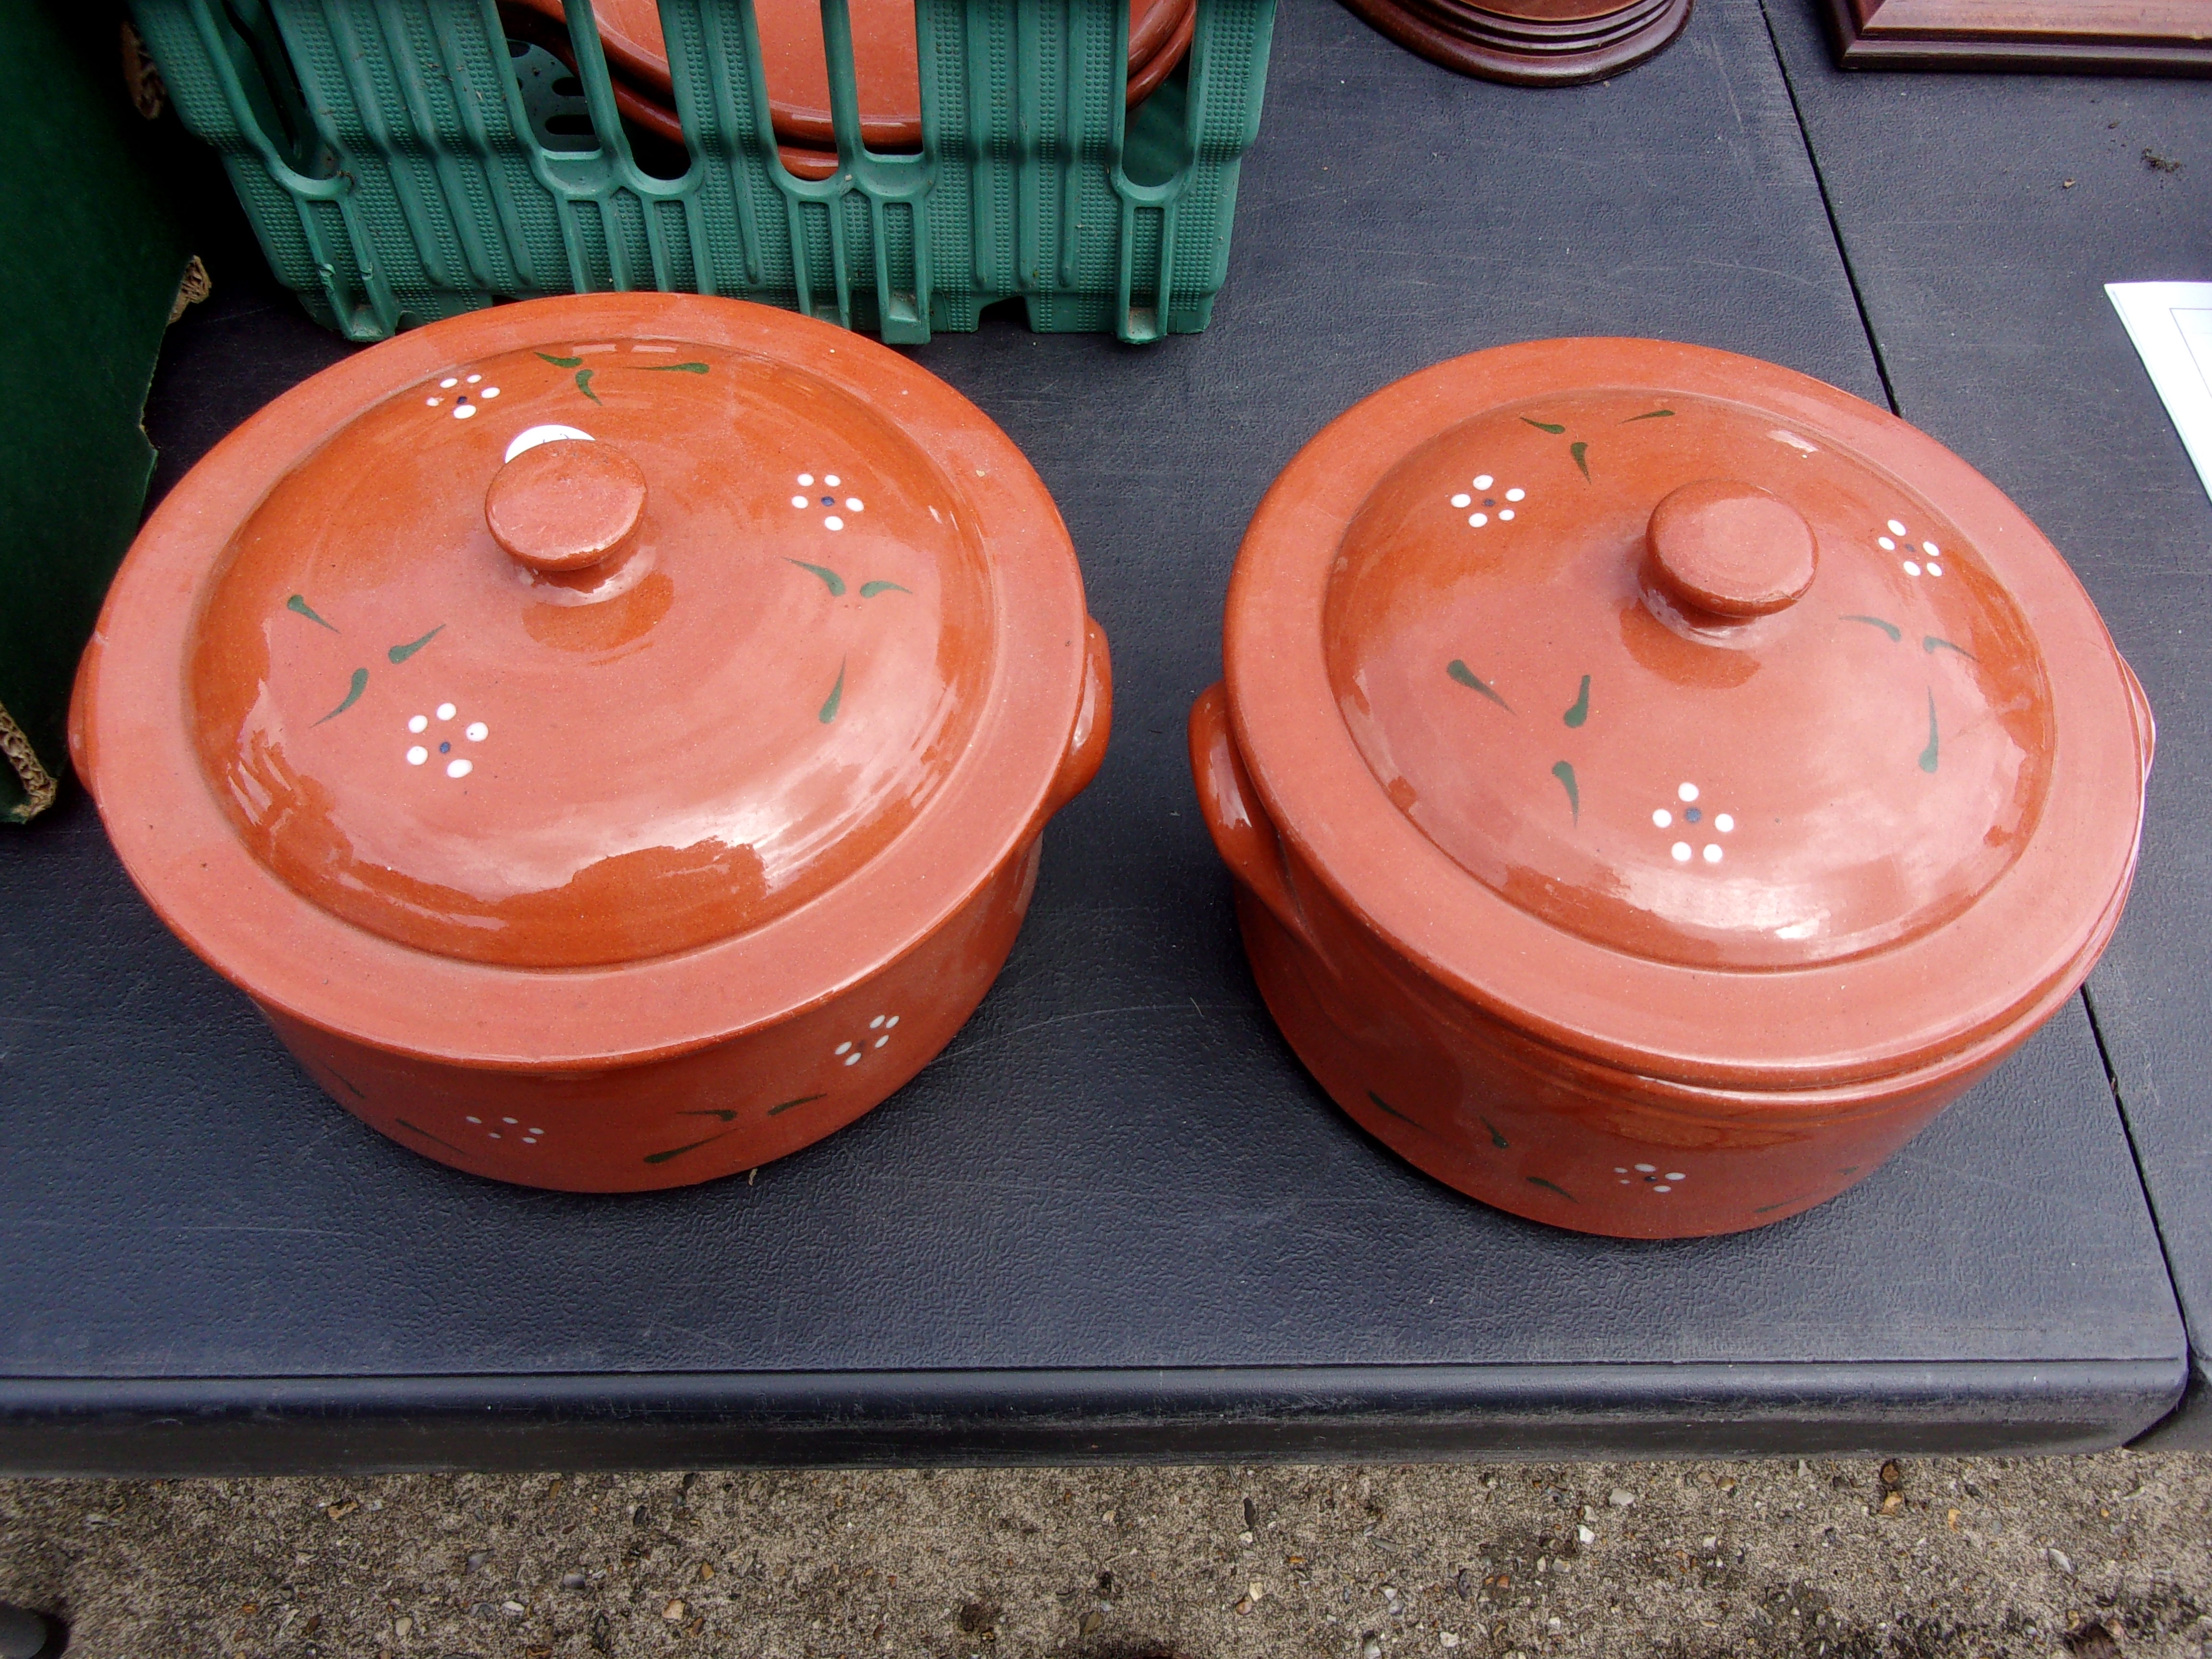 Barefoot Somerset - A pair of Decorative Bowls with Lids